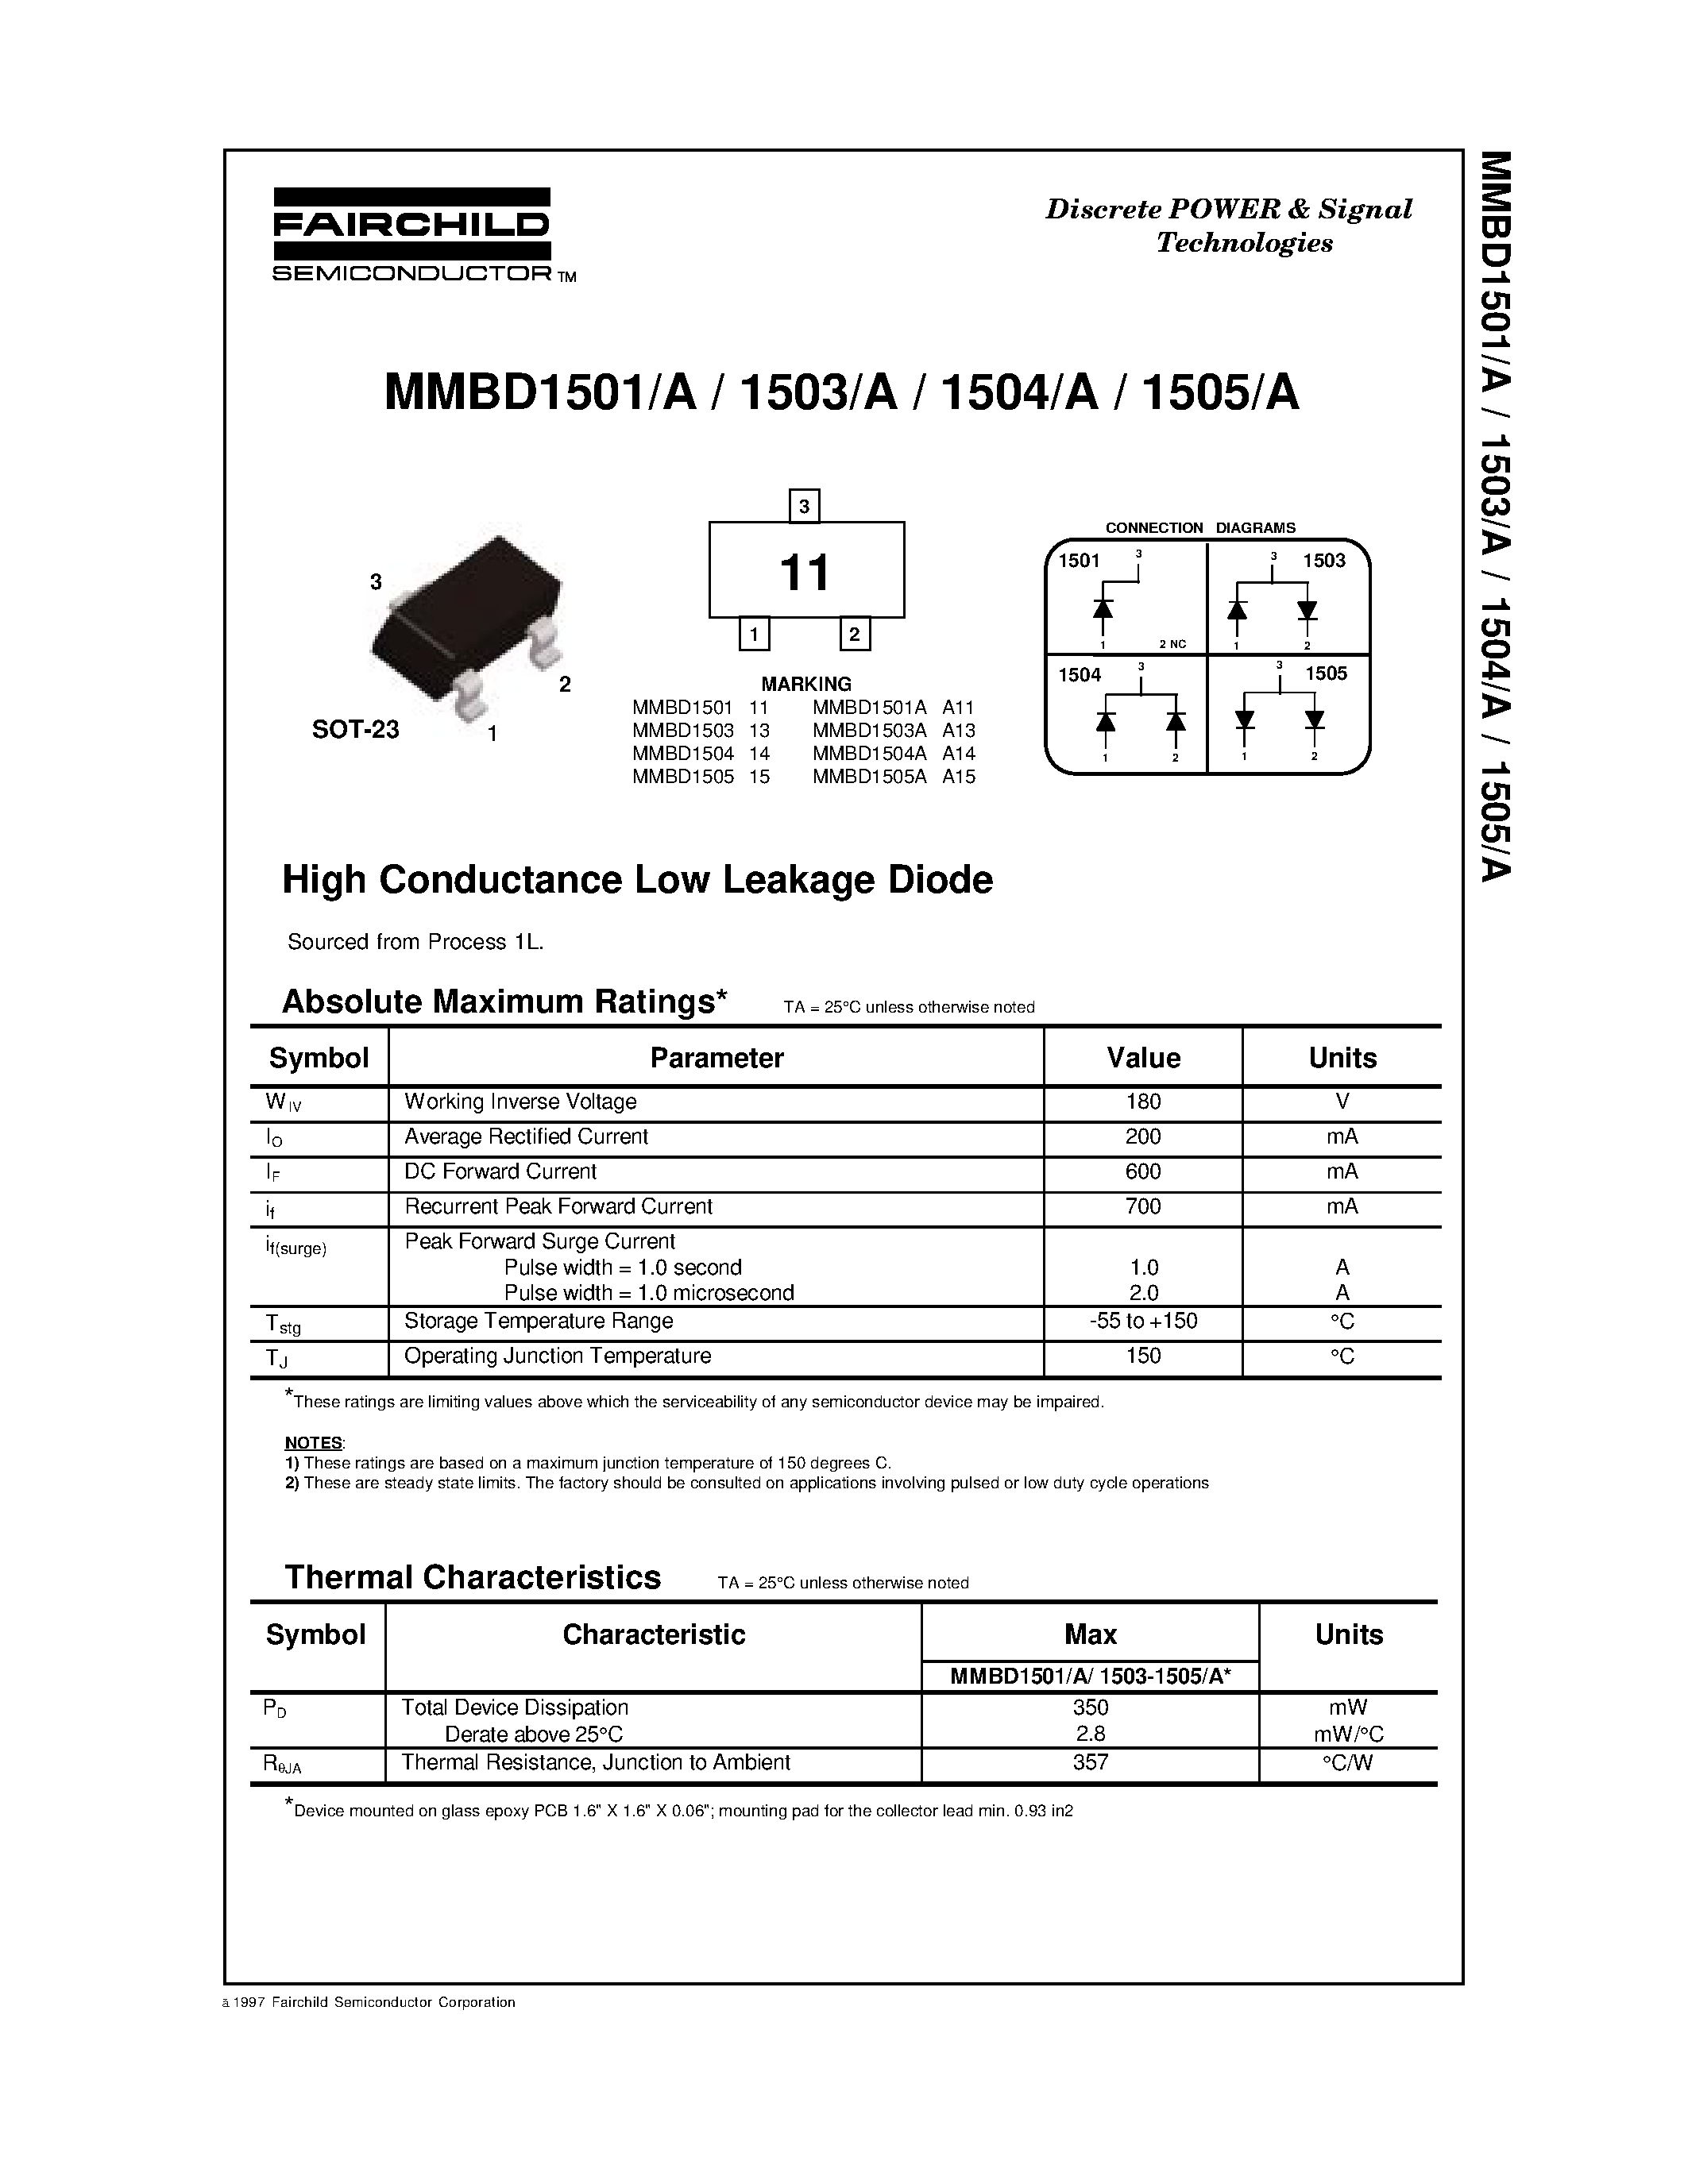 Даташит MMBD1503 - High Conductance Low Leakage Diode страница 1